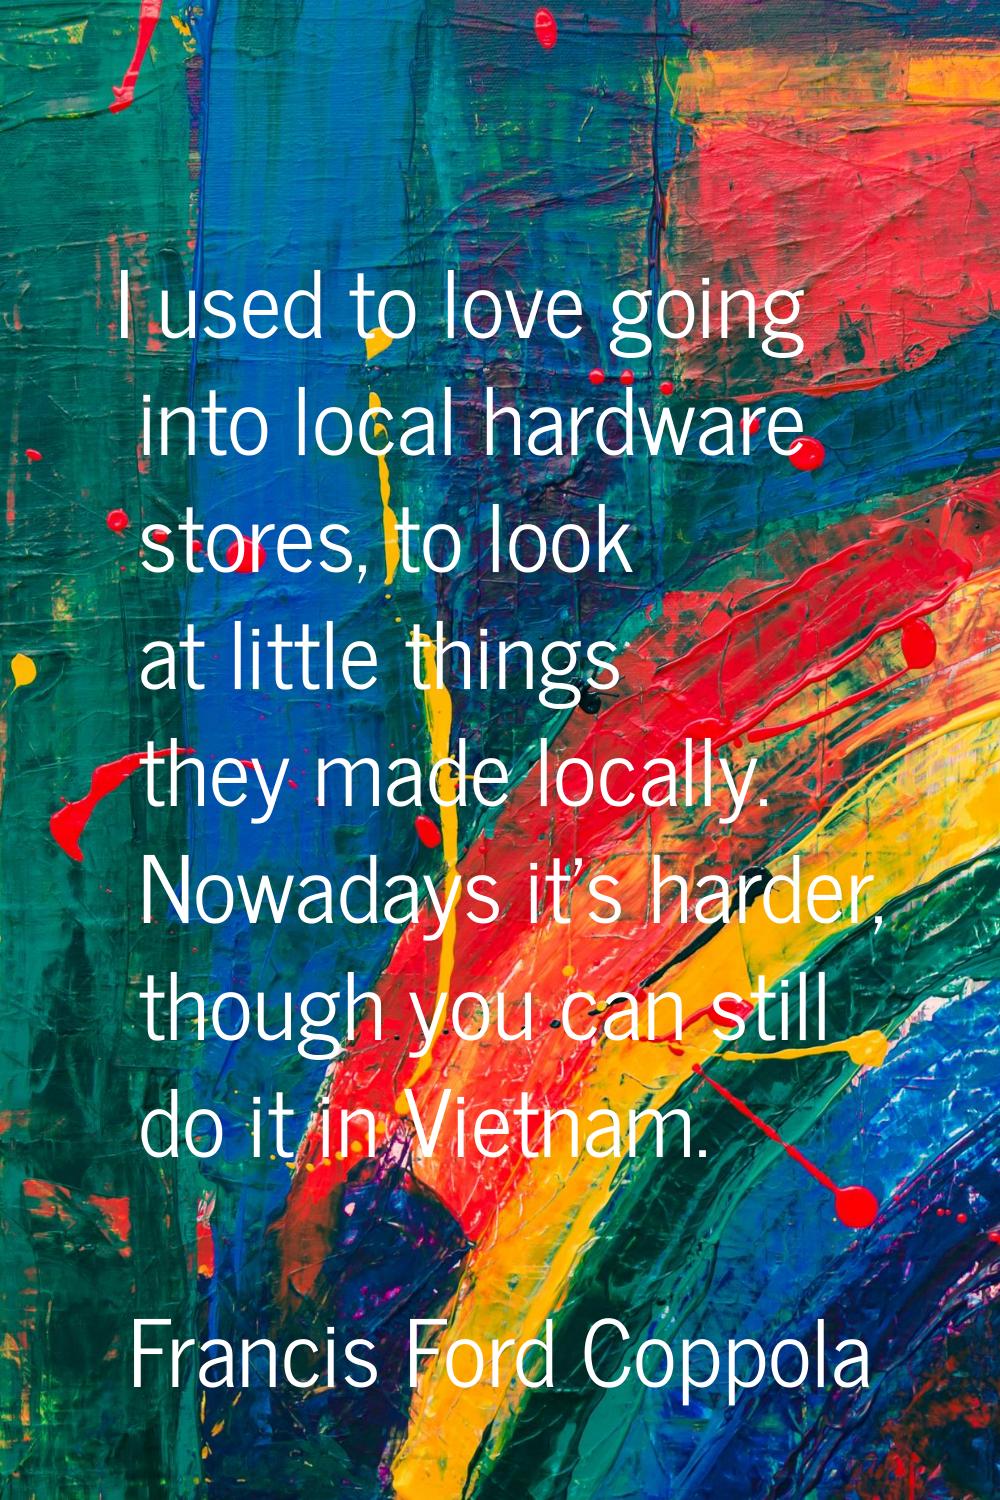 I used to love going into local hardware stores, to look at little things they made locally. Nowada